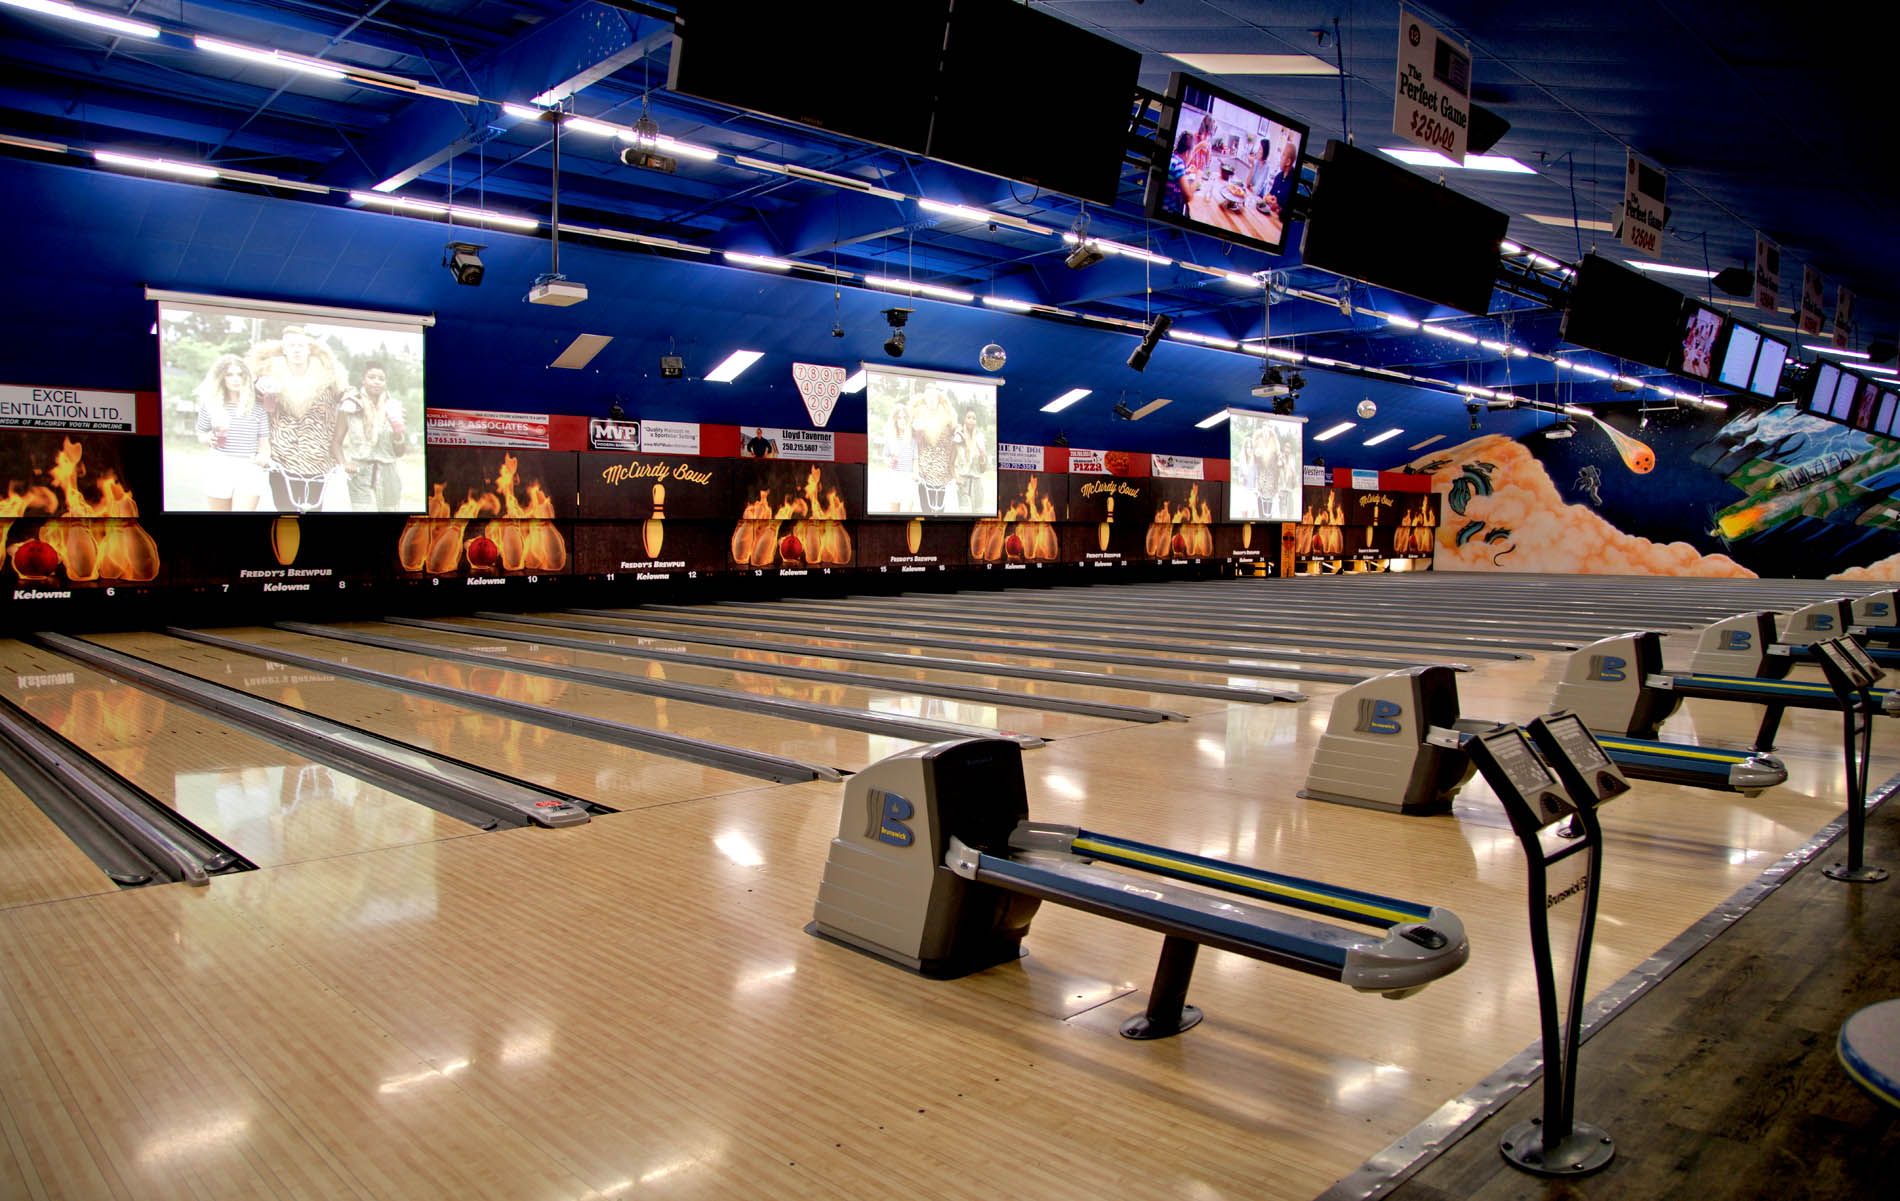 New Projectors Up The Cool Factor for Cosmic Bowling